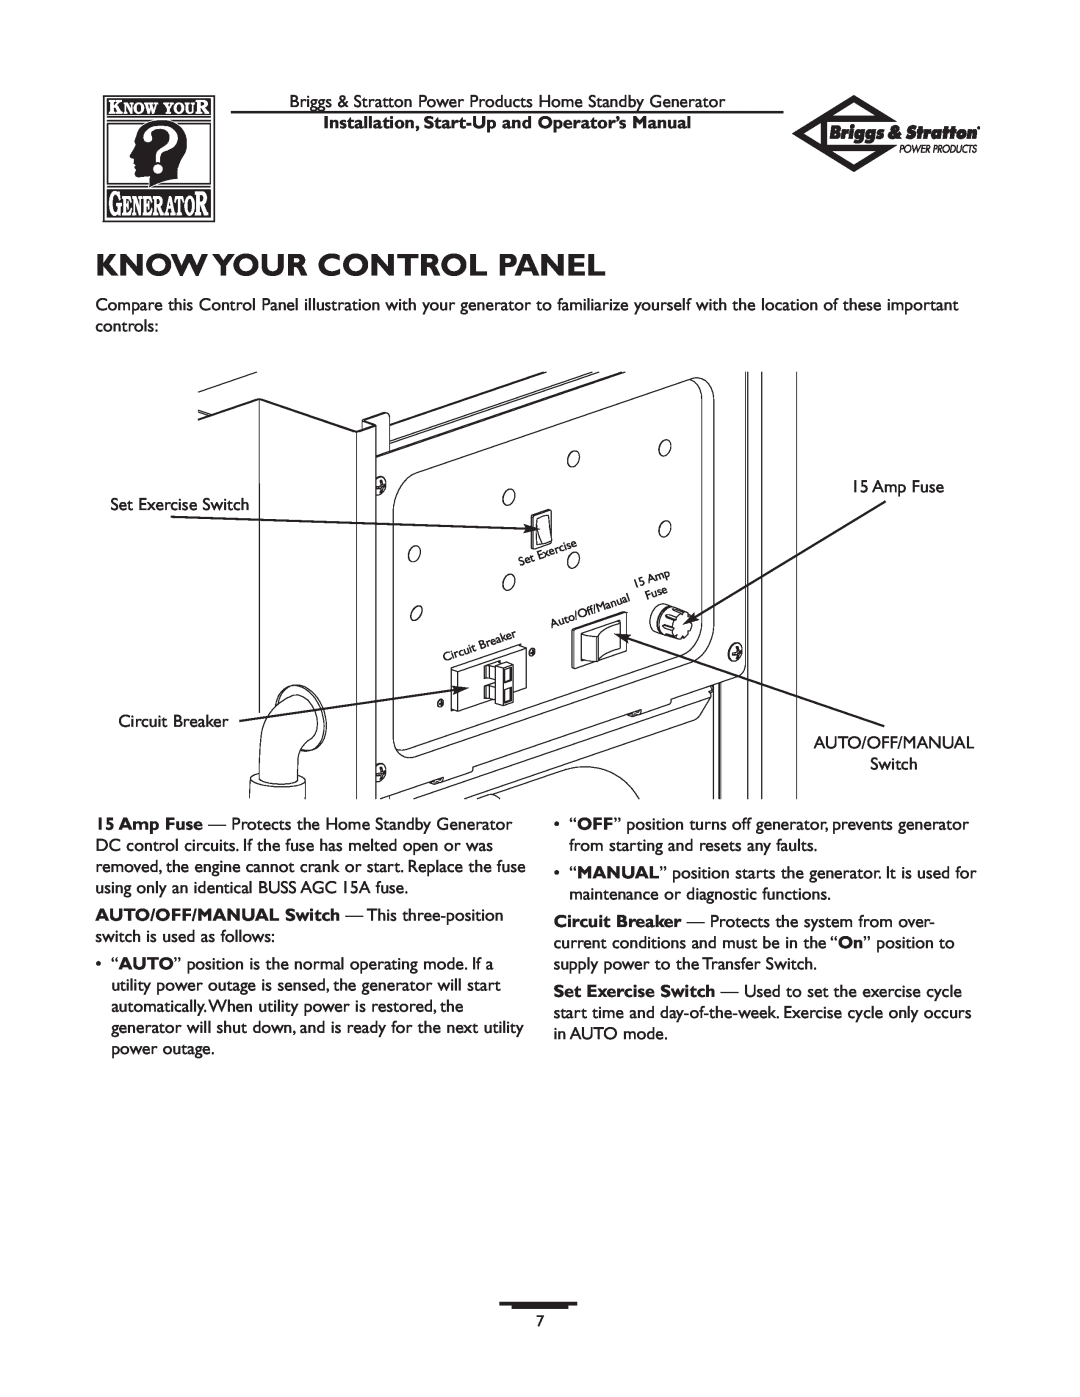 Briggs & Stratton 01897-0 manual Know Your Control Panel, Installation, Start-Up and Operator’s Manual, Breaker Circuit 